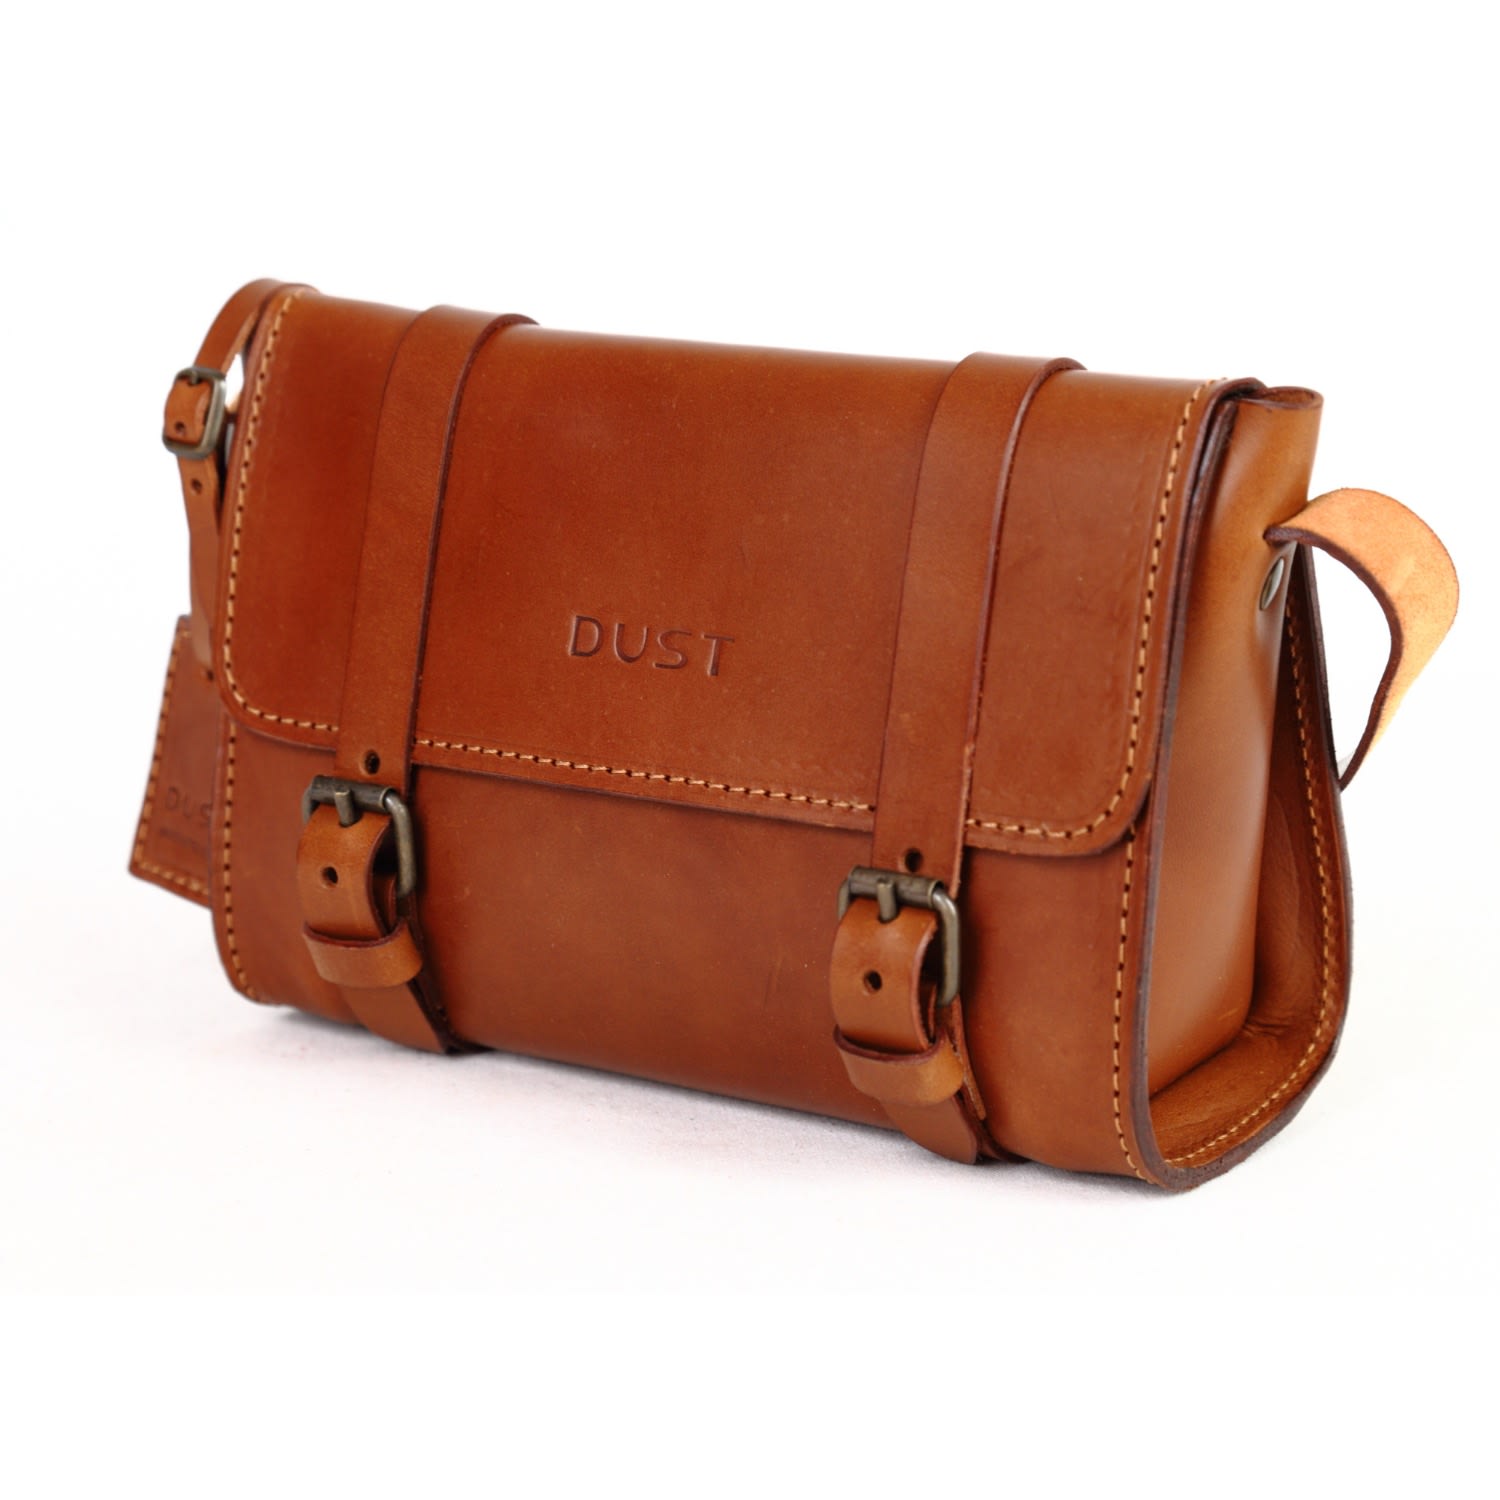 The Dust Company Women's Leather Crossbody Brown